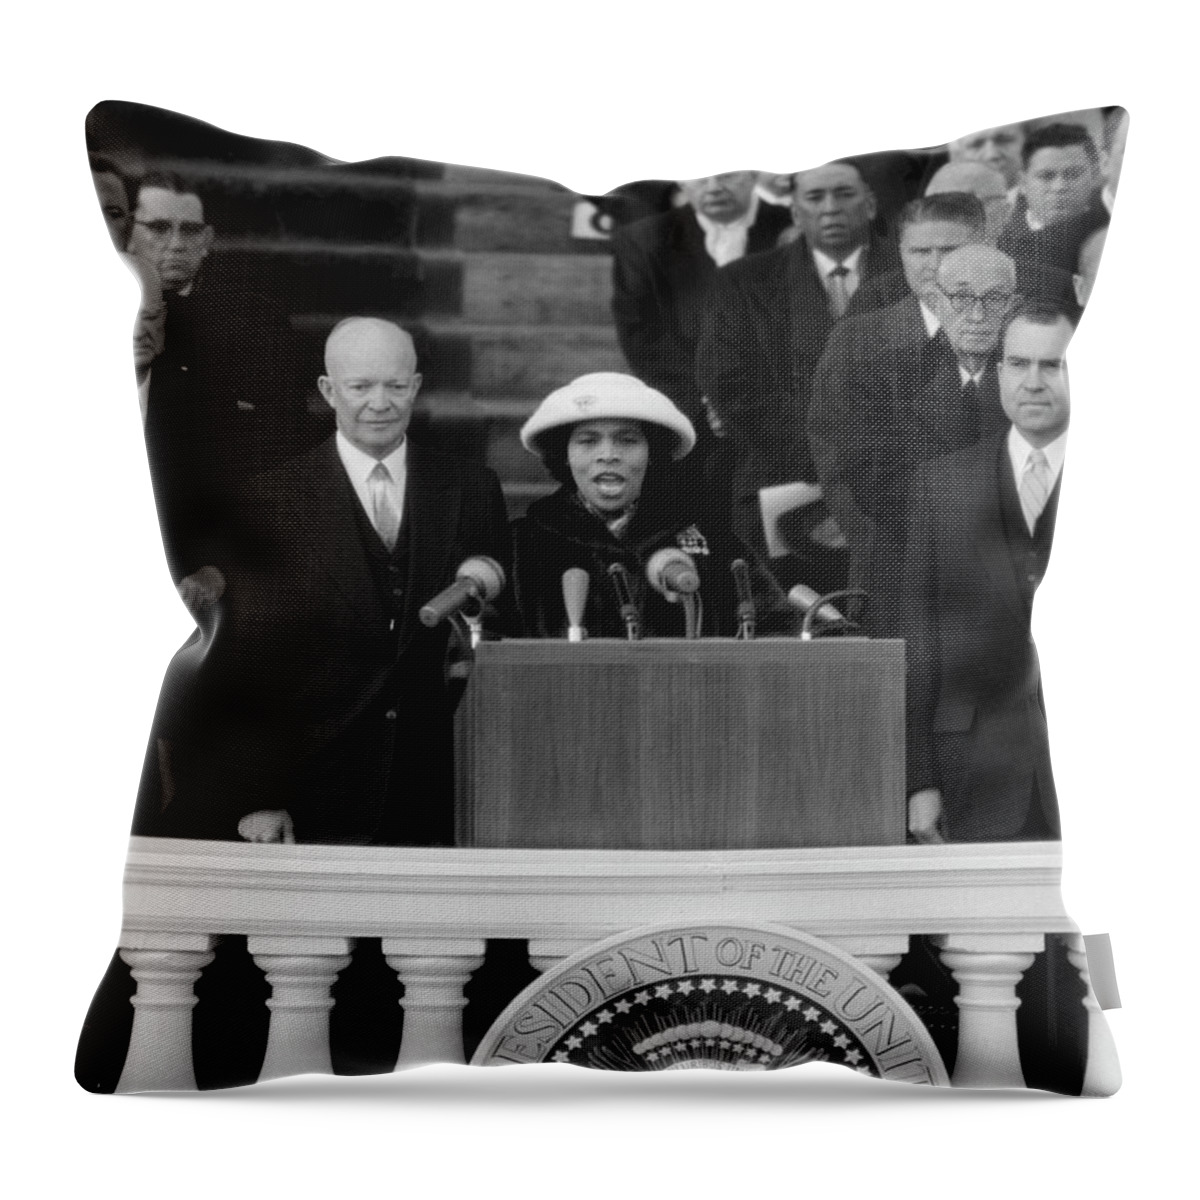 Dwight Eisenhower Throw Pillow featuring the photograph Marian Anderson Singing At Eisenhower Inauguration - 1957 by War Is Hell Store